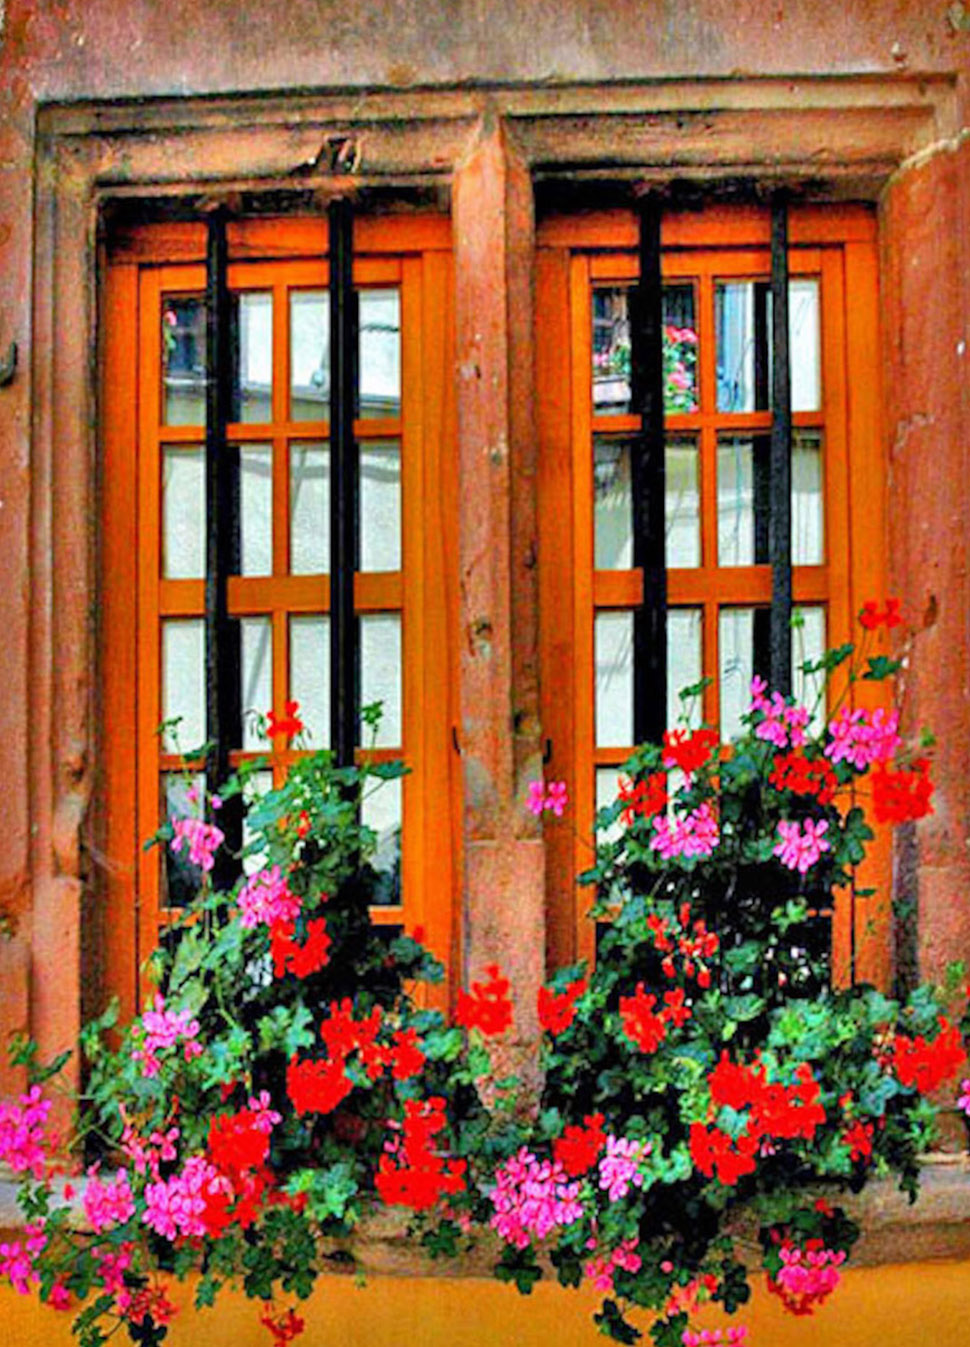 Pink and Red Kalanchoes in a Window Box ~ Kaysersberg, Alsace, France